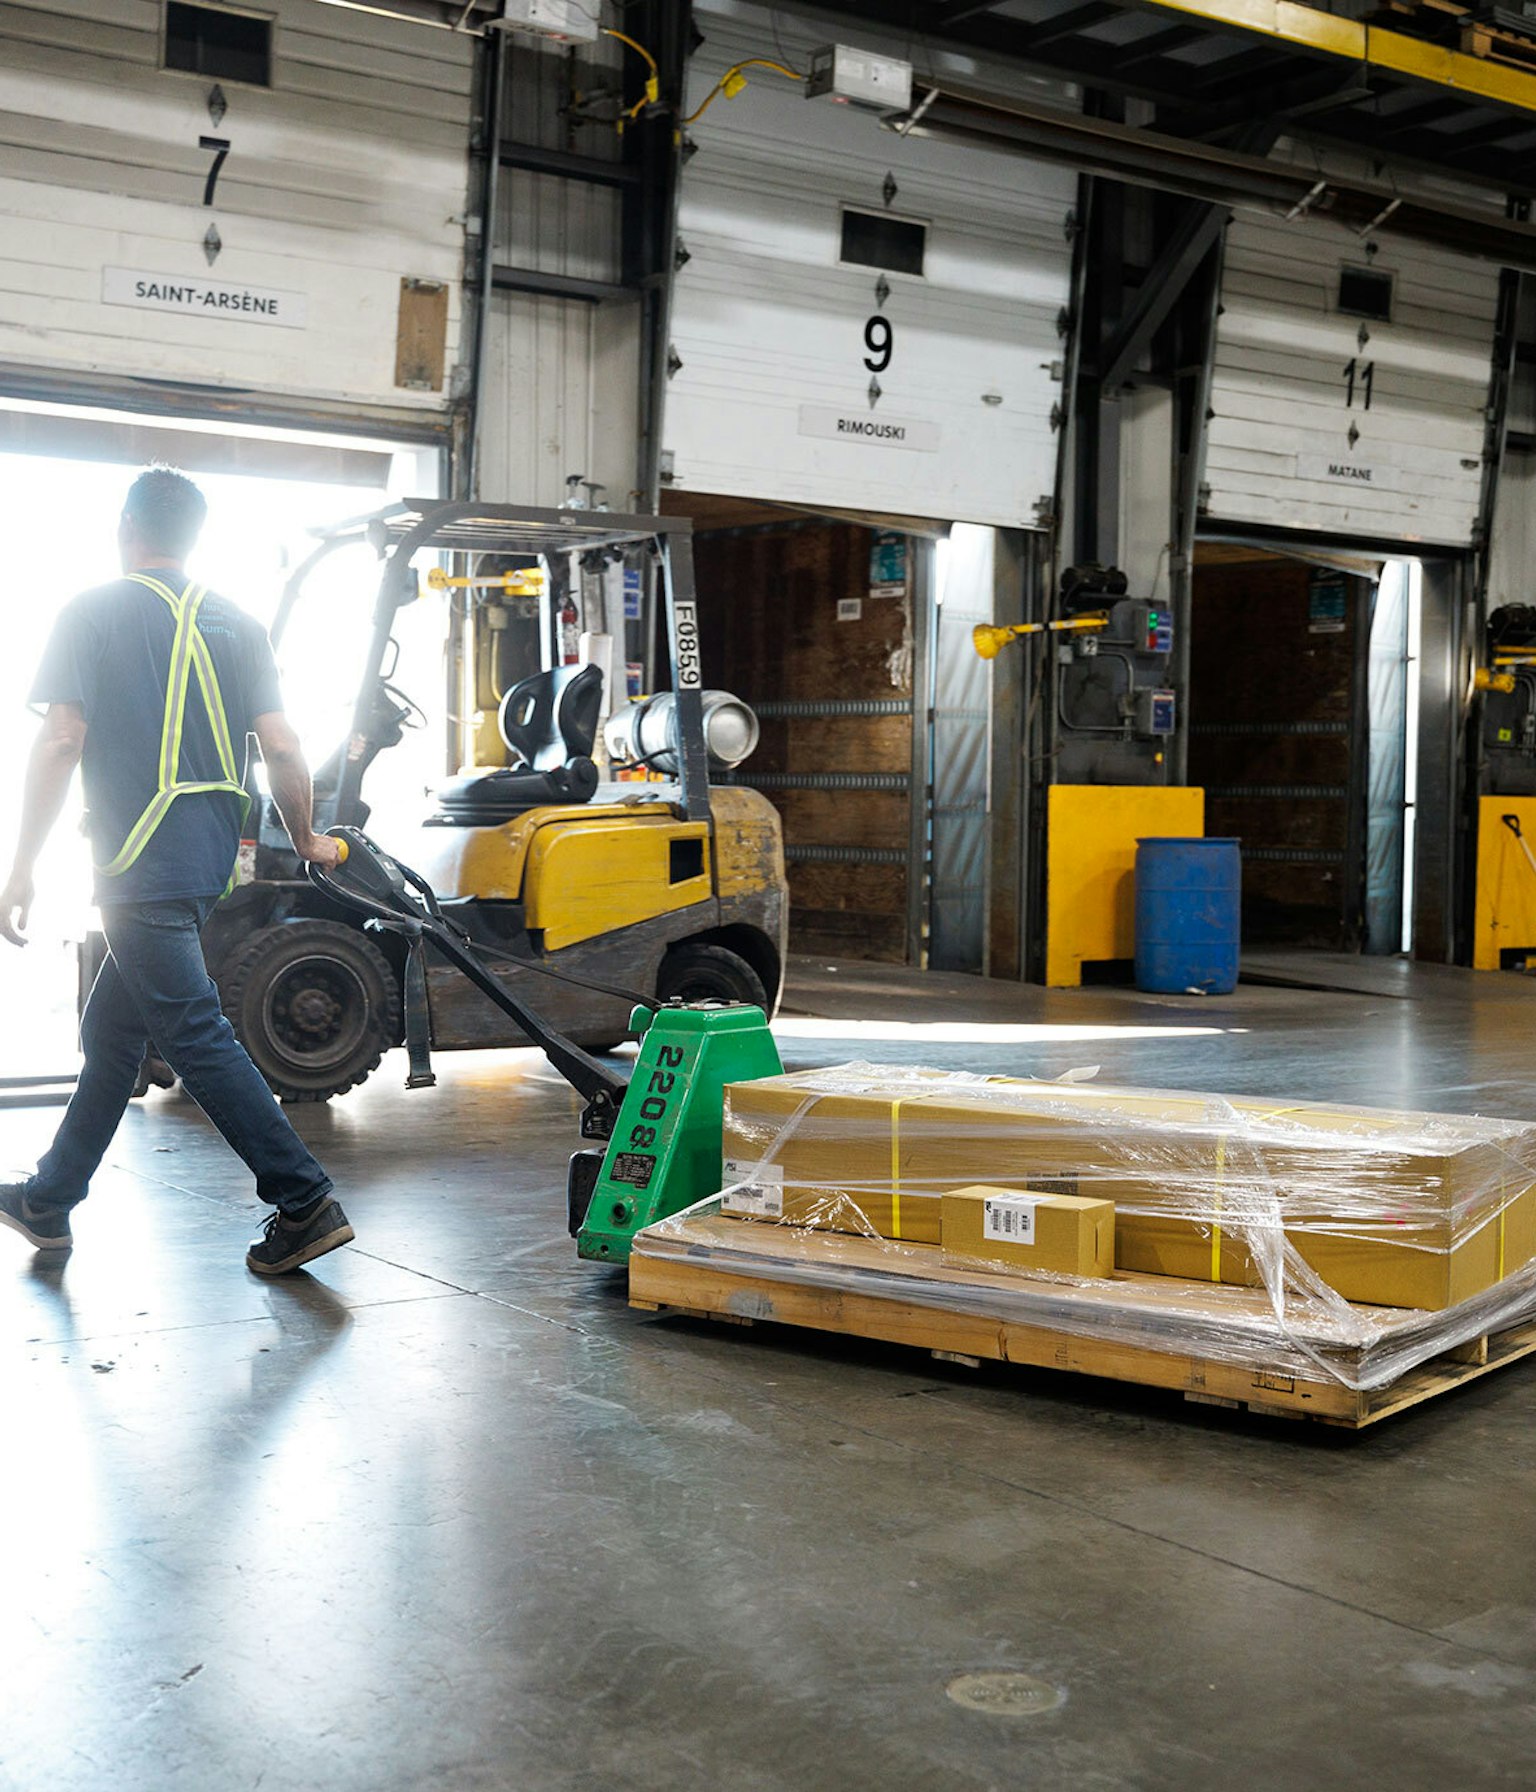 A Groupe Morneau handler moving a pallet on a loading dock.